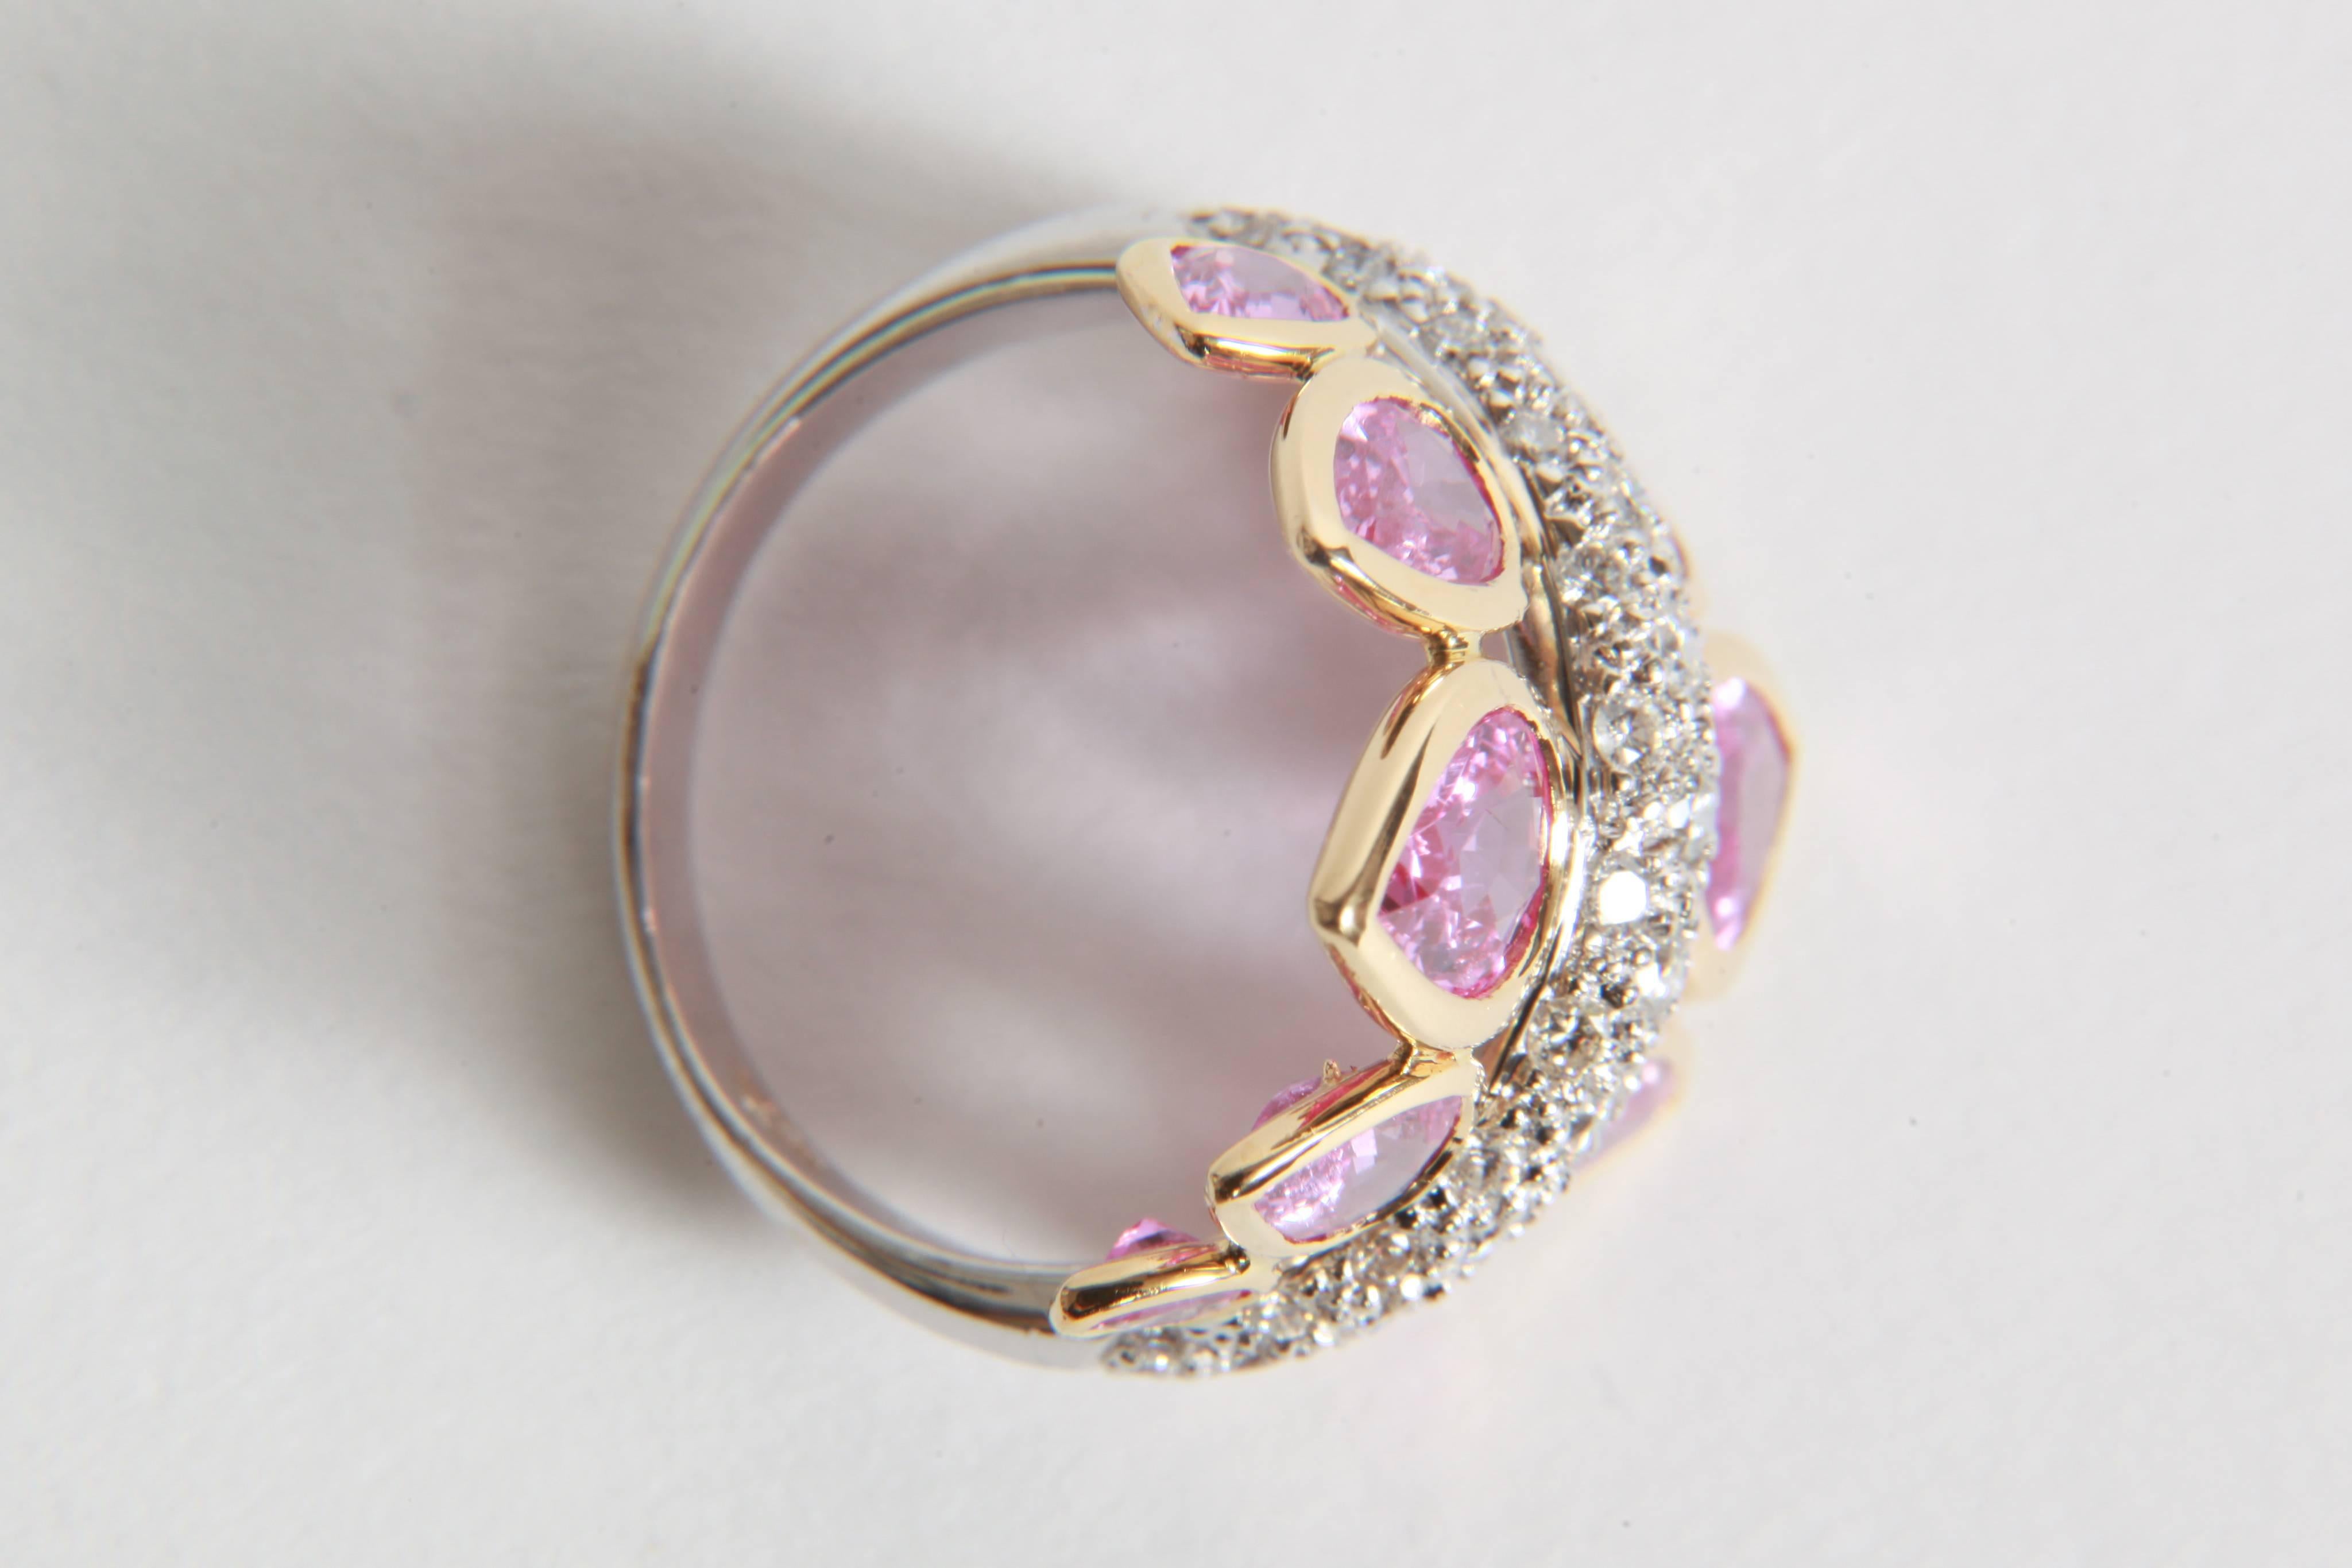 4, 74 Carats Pink Sapphires and 1 Carat White Diamonds Ring by Marion Jeantet 3